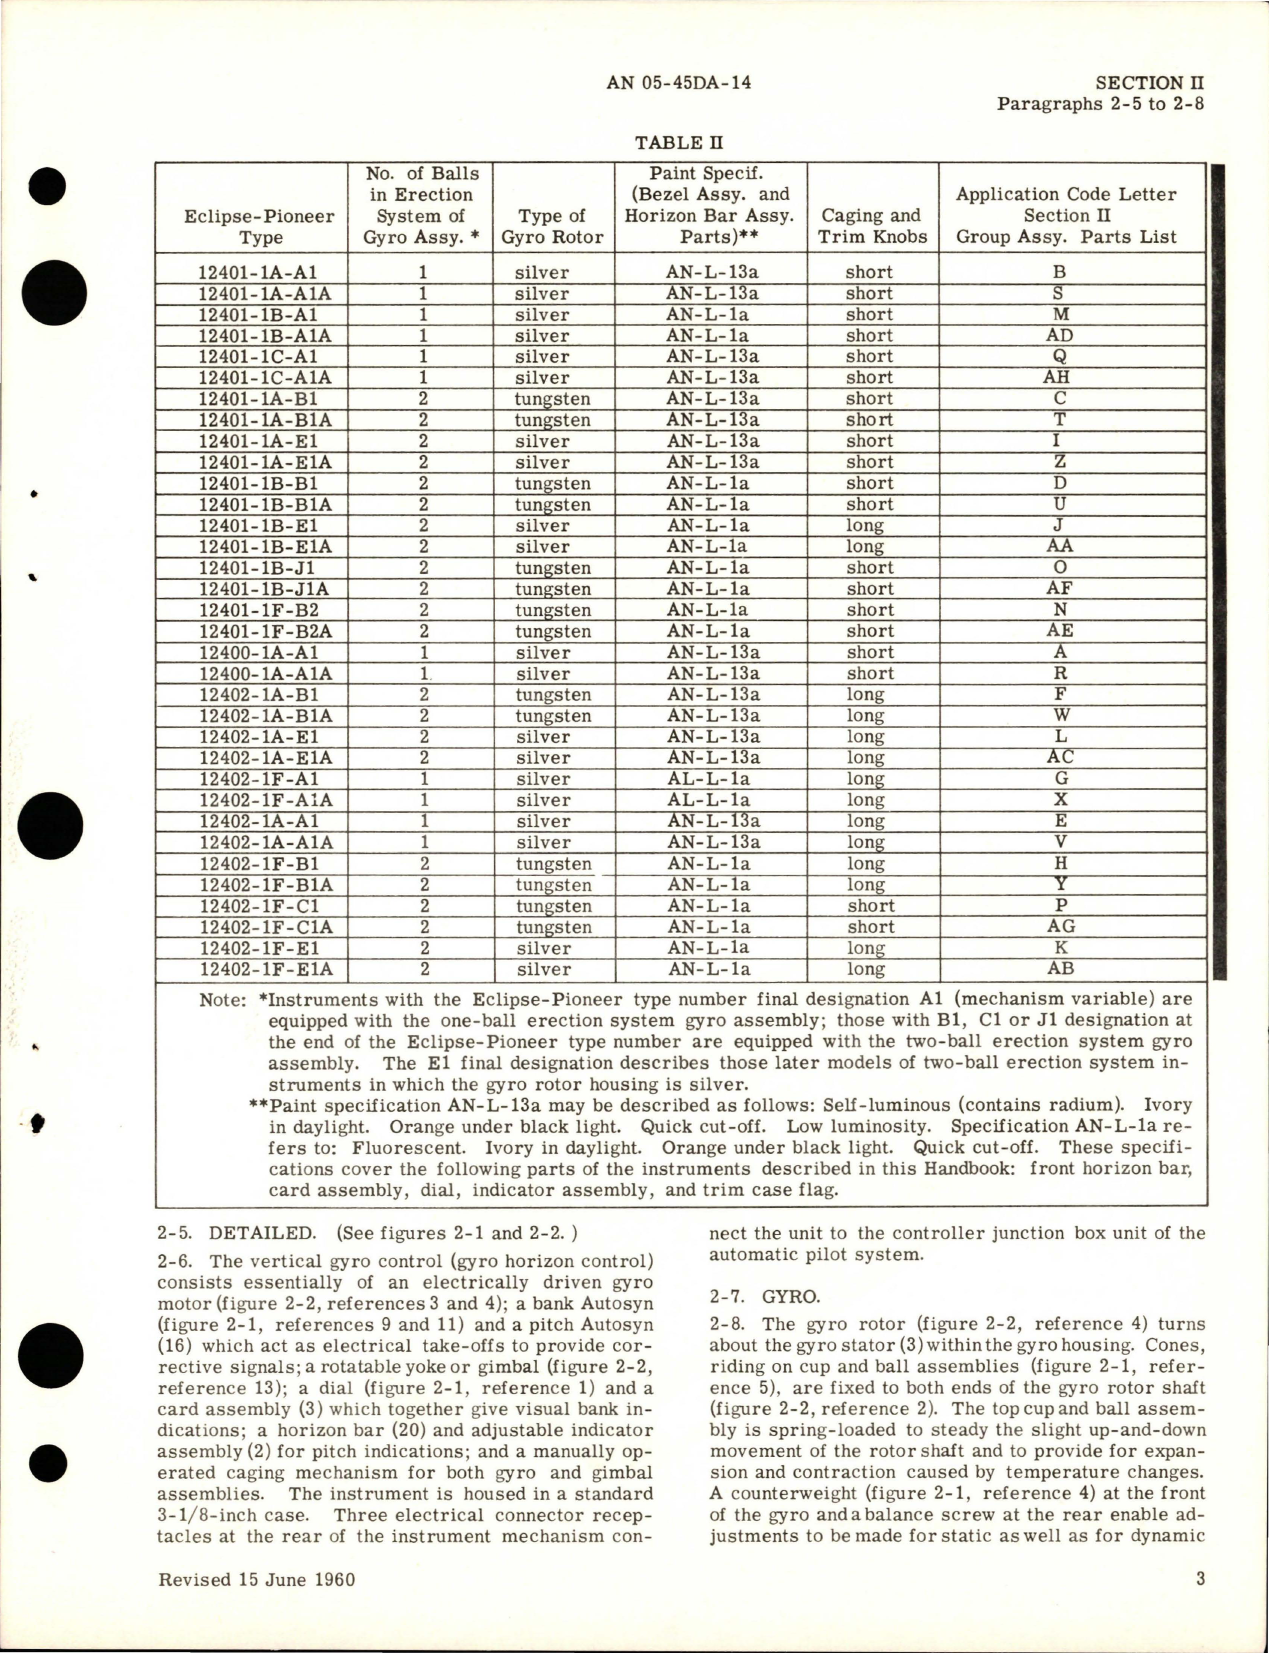 Sample page 7 from AirCorps Library document: Overhaul Instructions for Vertical Gyro Controls